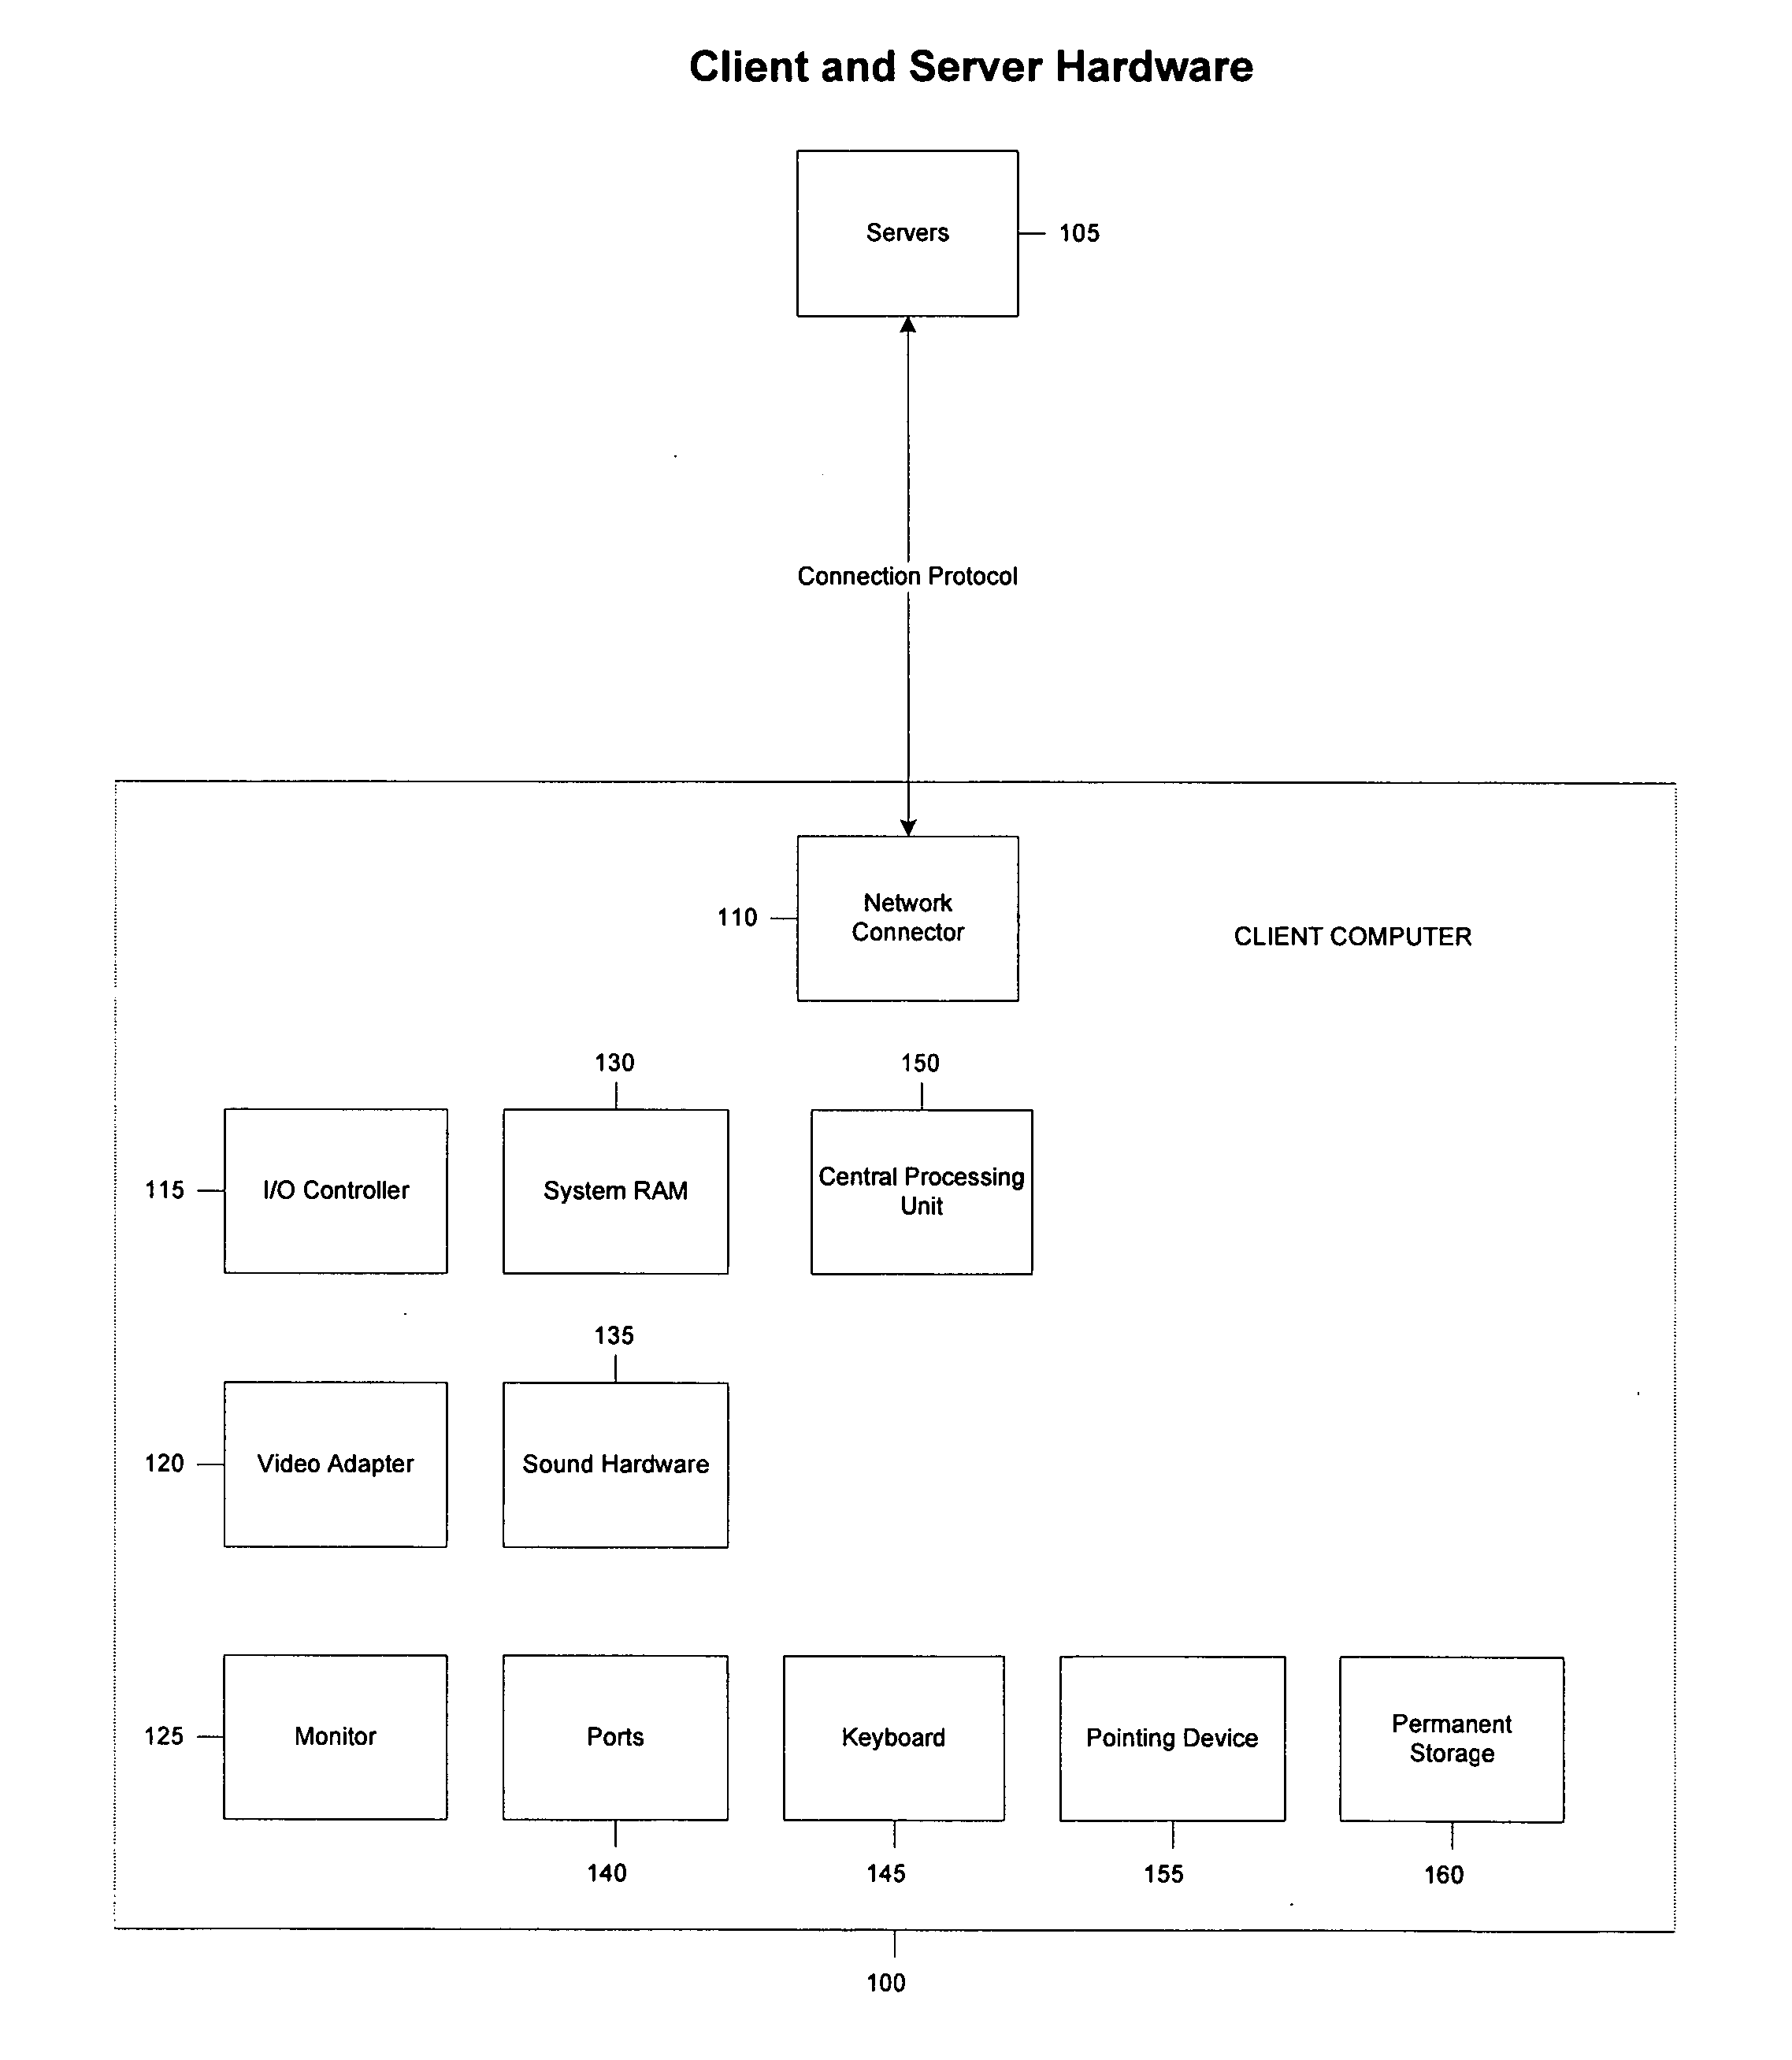 Generic, multi-instance method and GUI detection system for tracking and monitoring computer applications